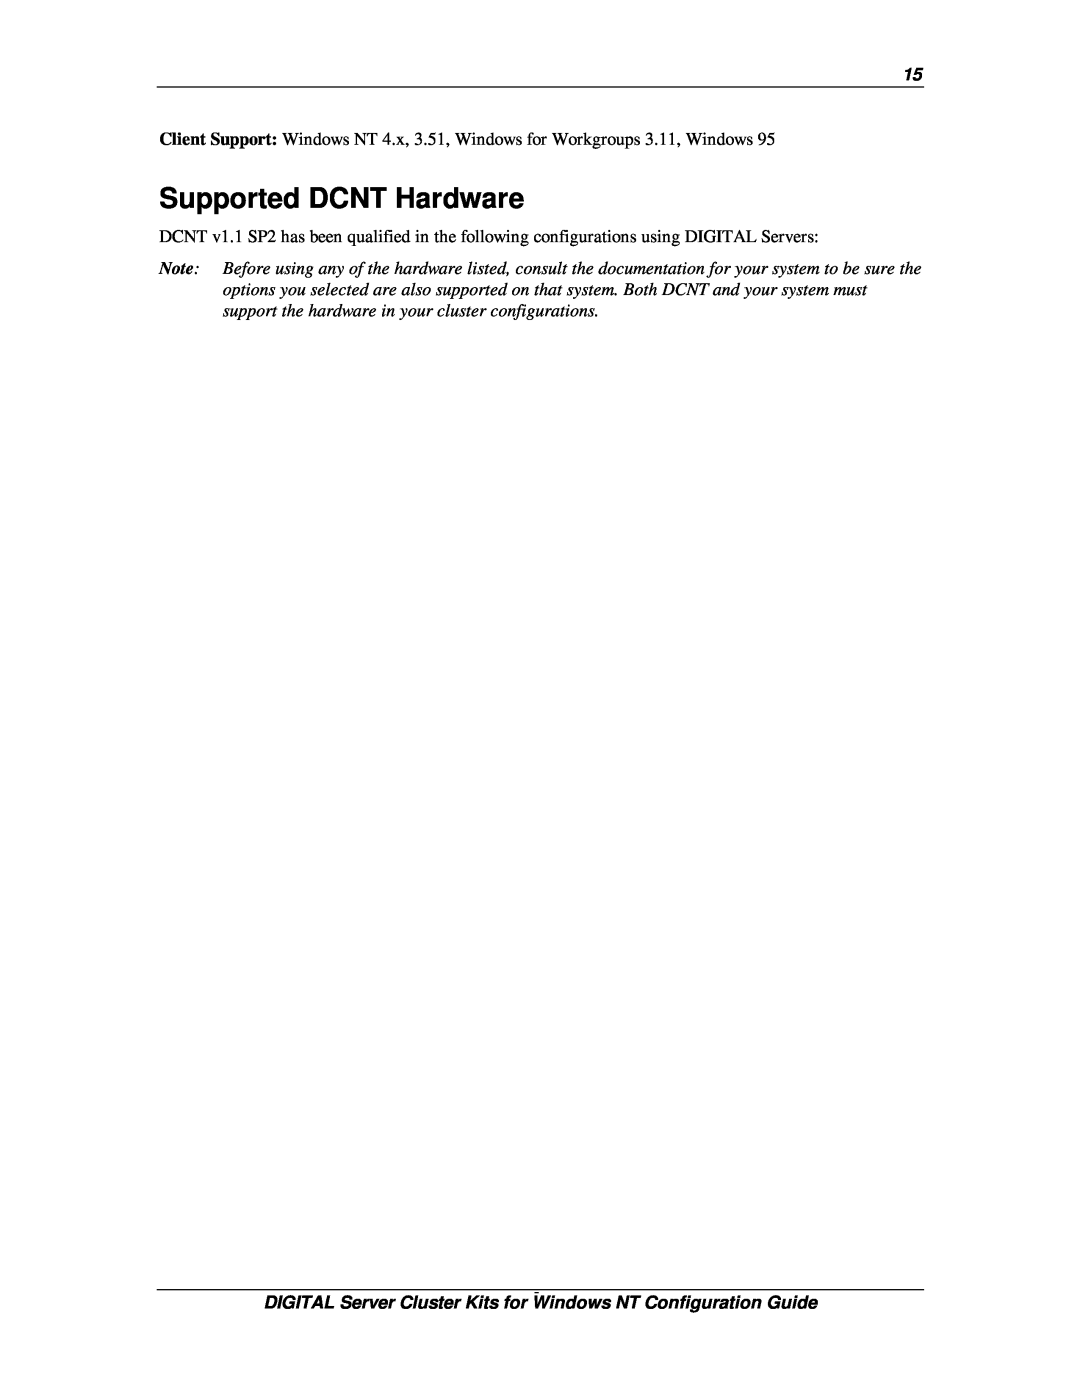 Compaq DIGITAL Server Cluster Kits for Windows NT manual Supported DCNT Hardware 